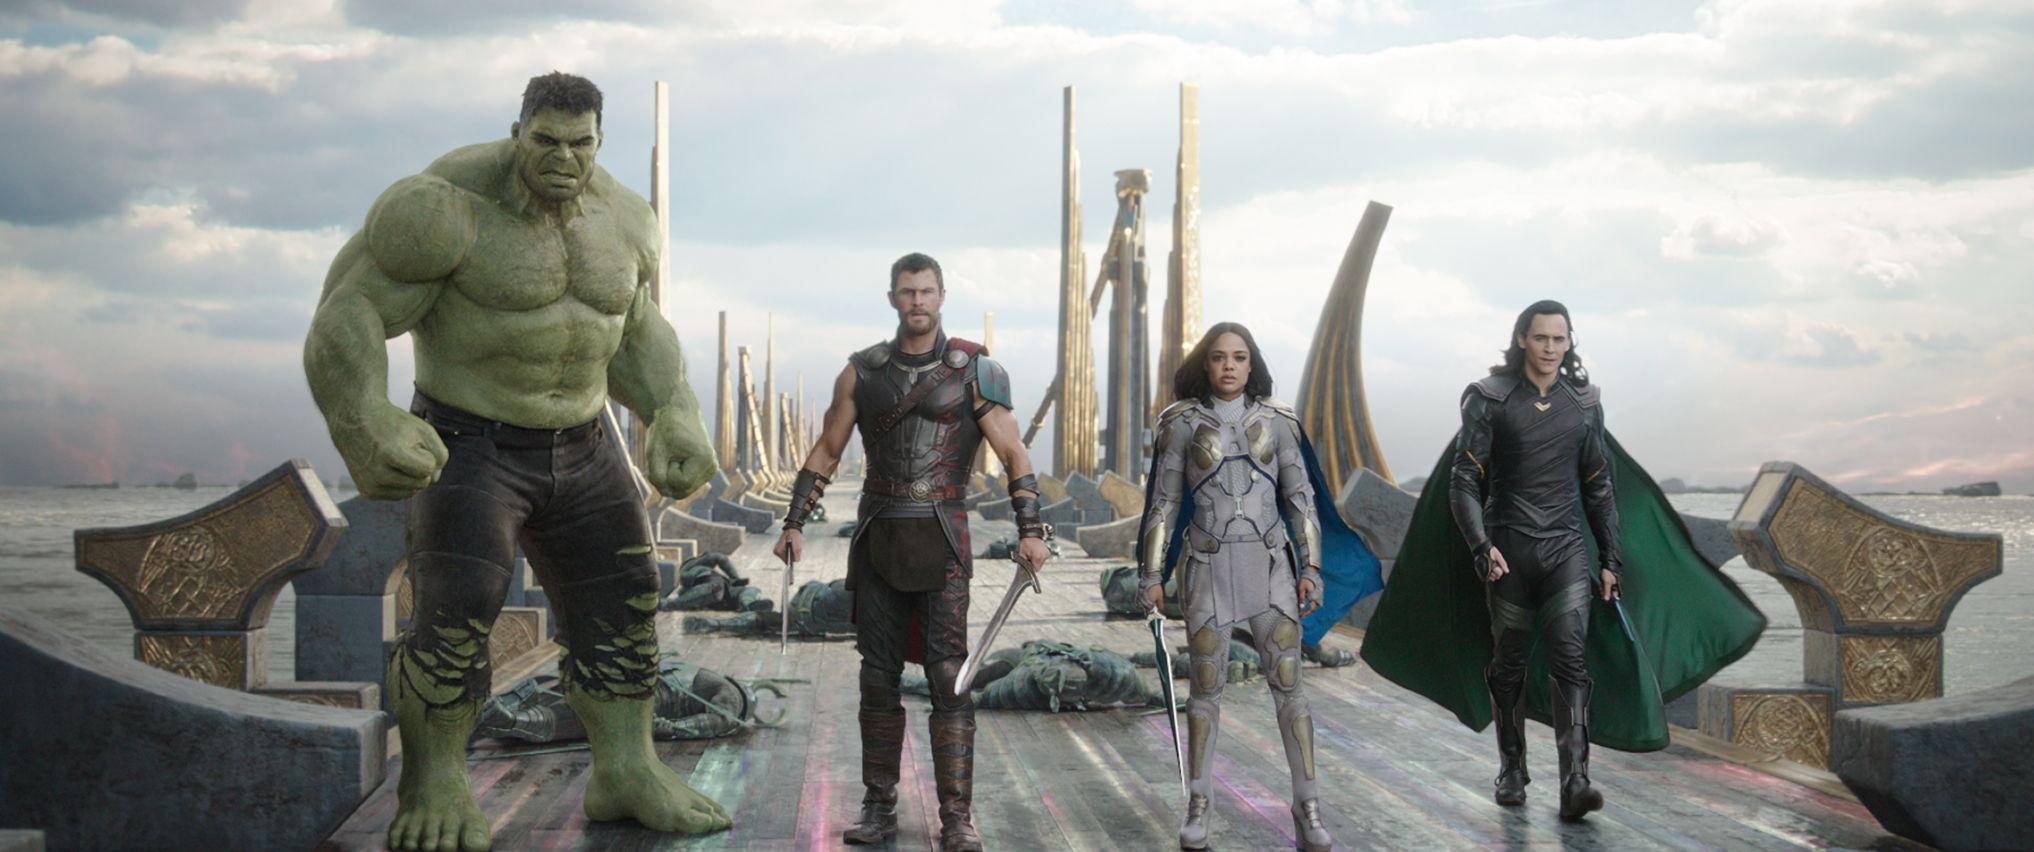 HQ Image From Thor: Ragnarok Tease A Beautiful And Colorful World